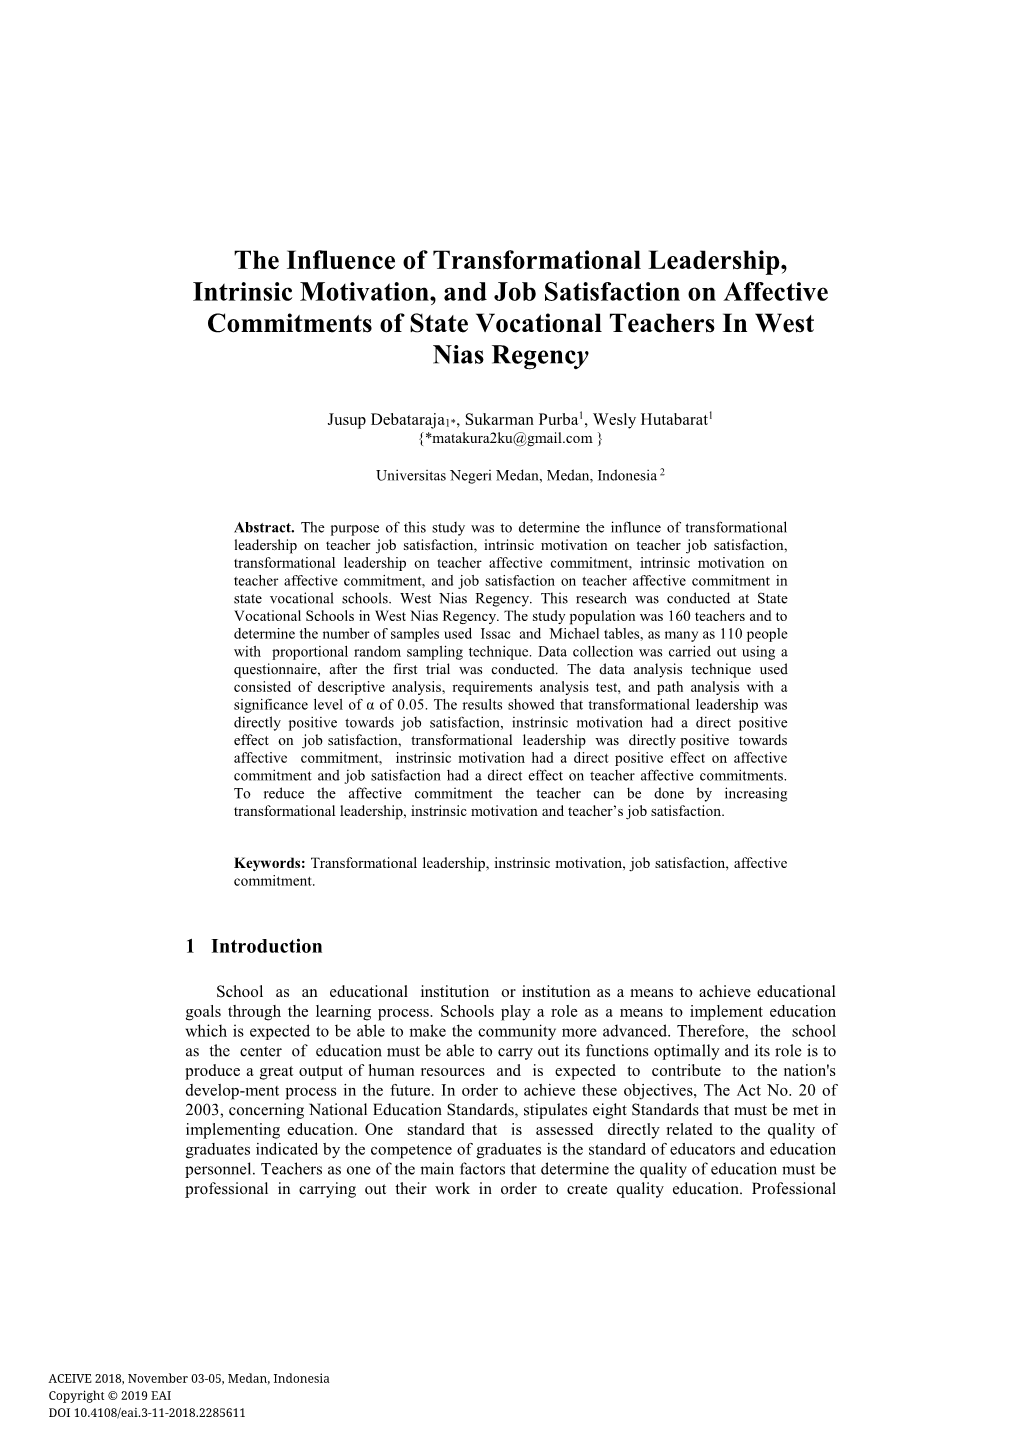 The Influence of Transformational Leadership, Intrinsic Motivation, and Job Satisfaction on Affective Commitments of State Vocational Teachers in West Nias Regenc Y